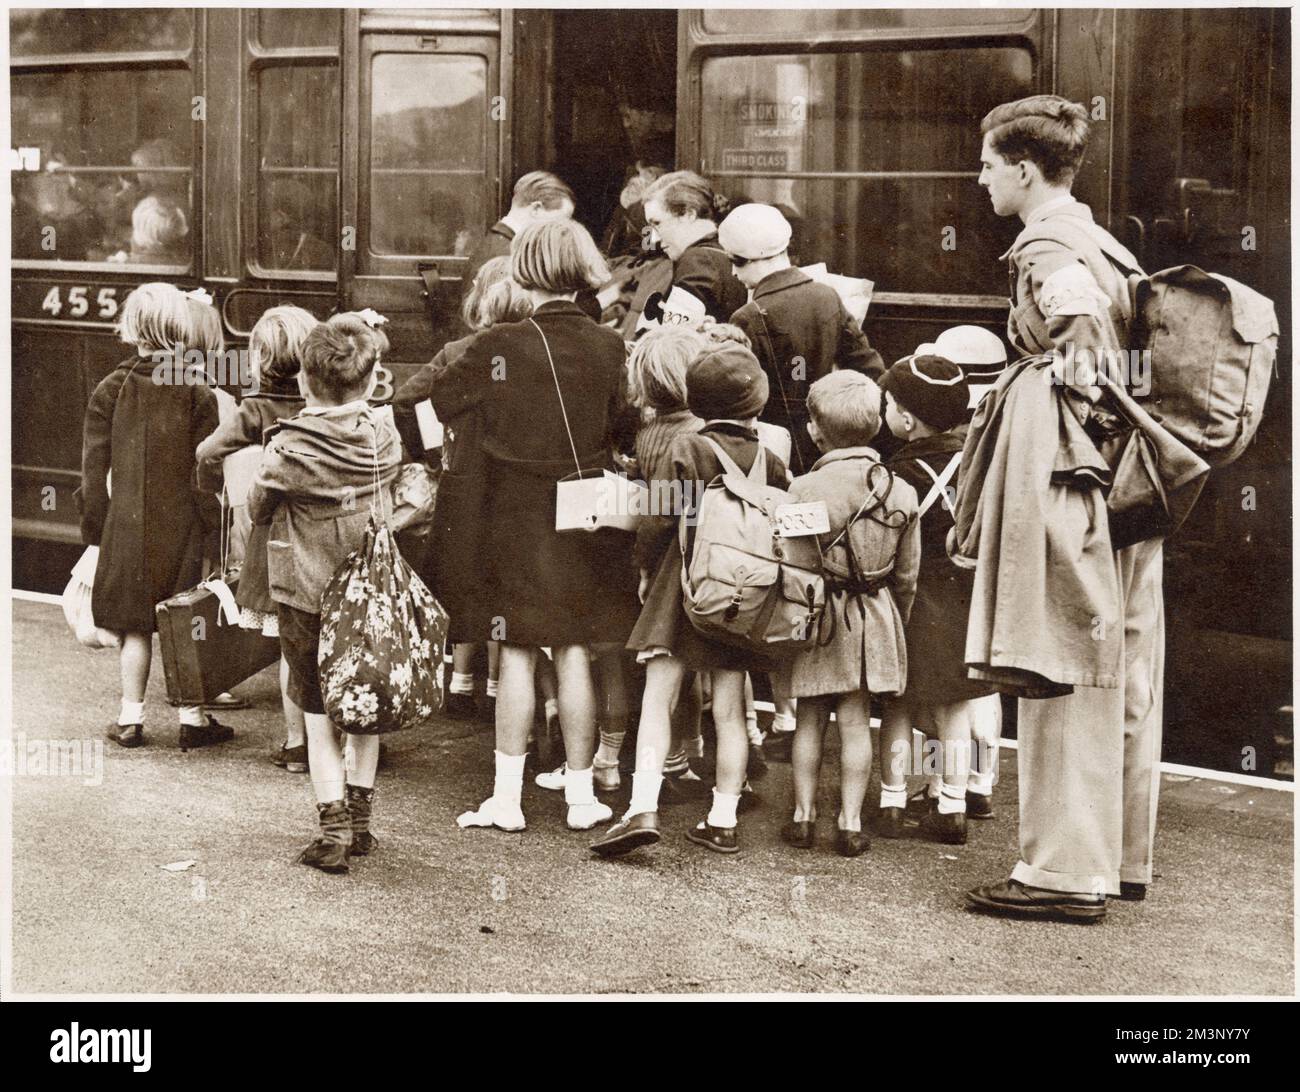 London's children evacuated at the beginning of World War Two: a first wave of 400000 children went on 1st September 1939, in the charge of 22000 teachers. Here a party is seen boarding a train at a main line station in the suburbs of London, equipped with gas masks and carrying their belongings in bags and haversacks. Stock Photo